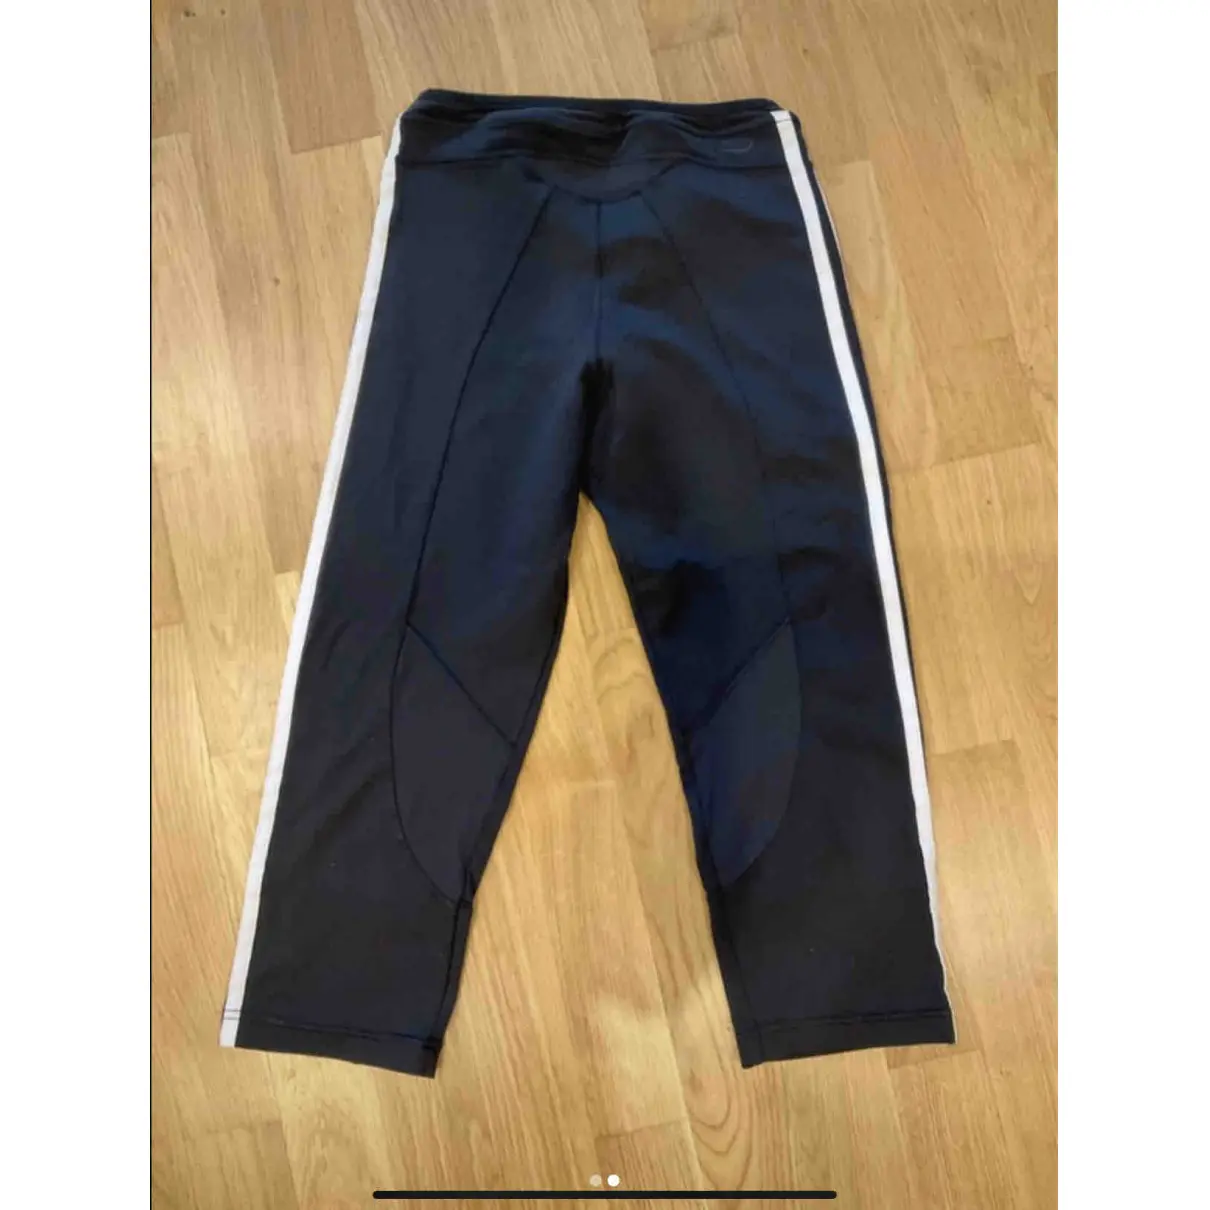 Buy Adidas Black Synthetic Trousers online